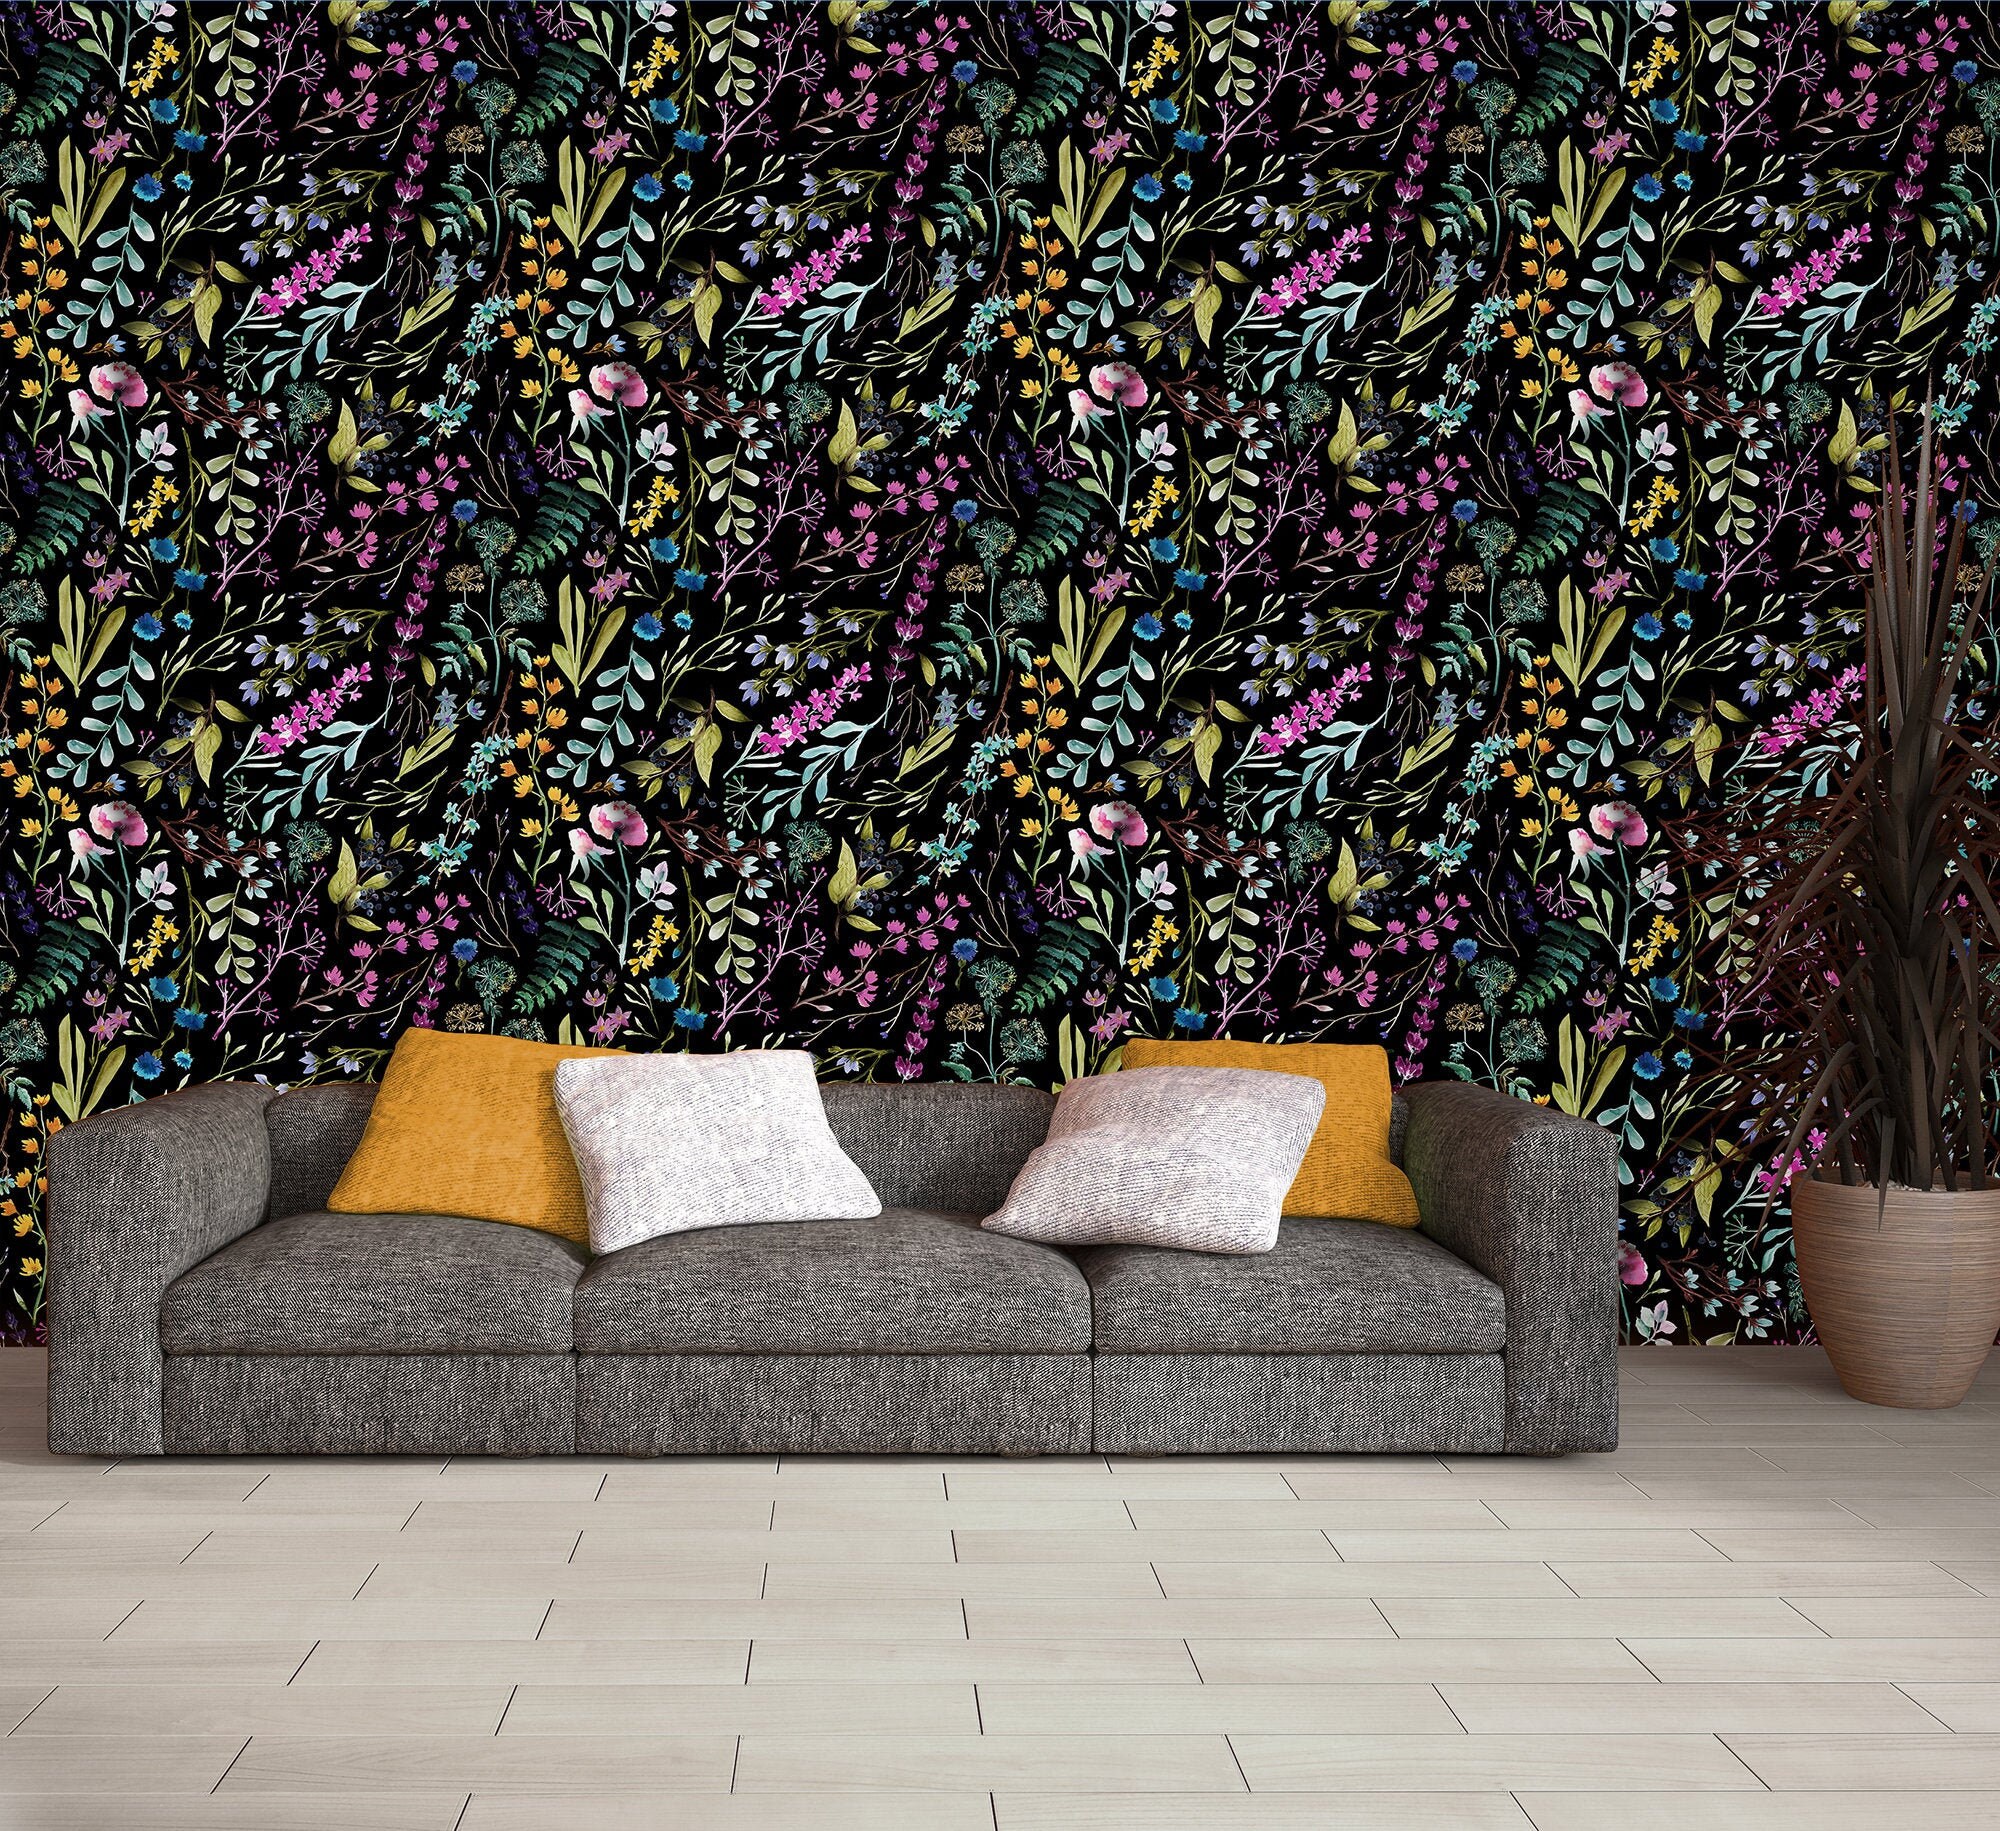 Black Wallpaper With Small Colorful Leaves and Flowers Self - Etsy